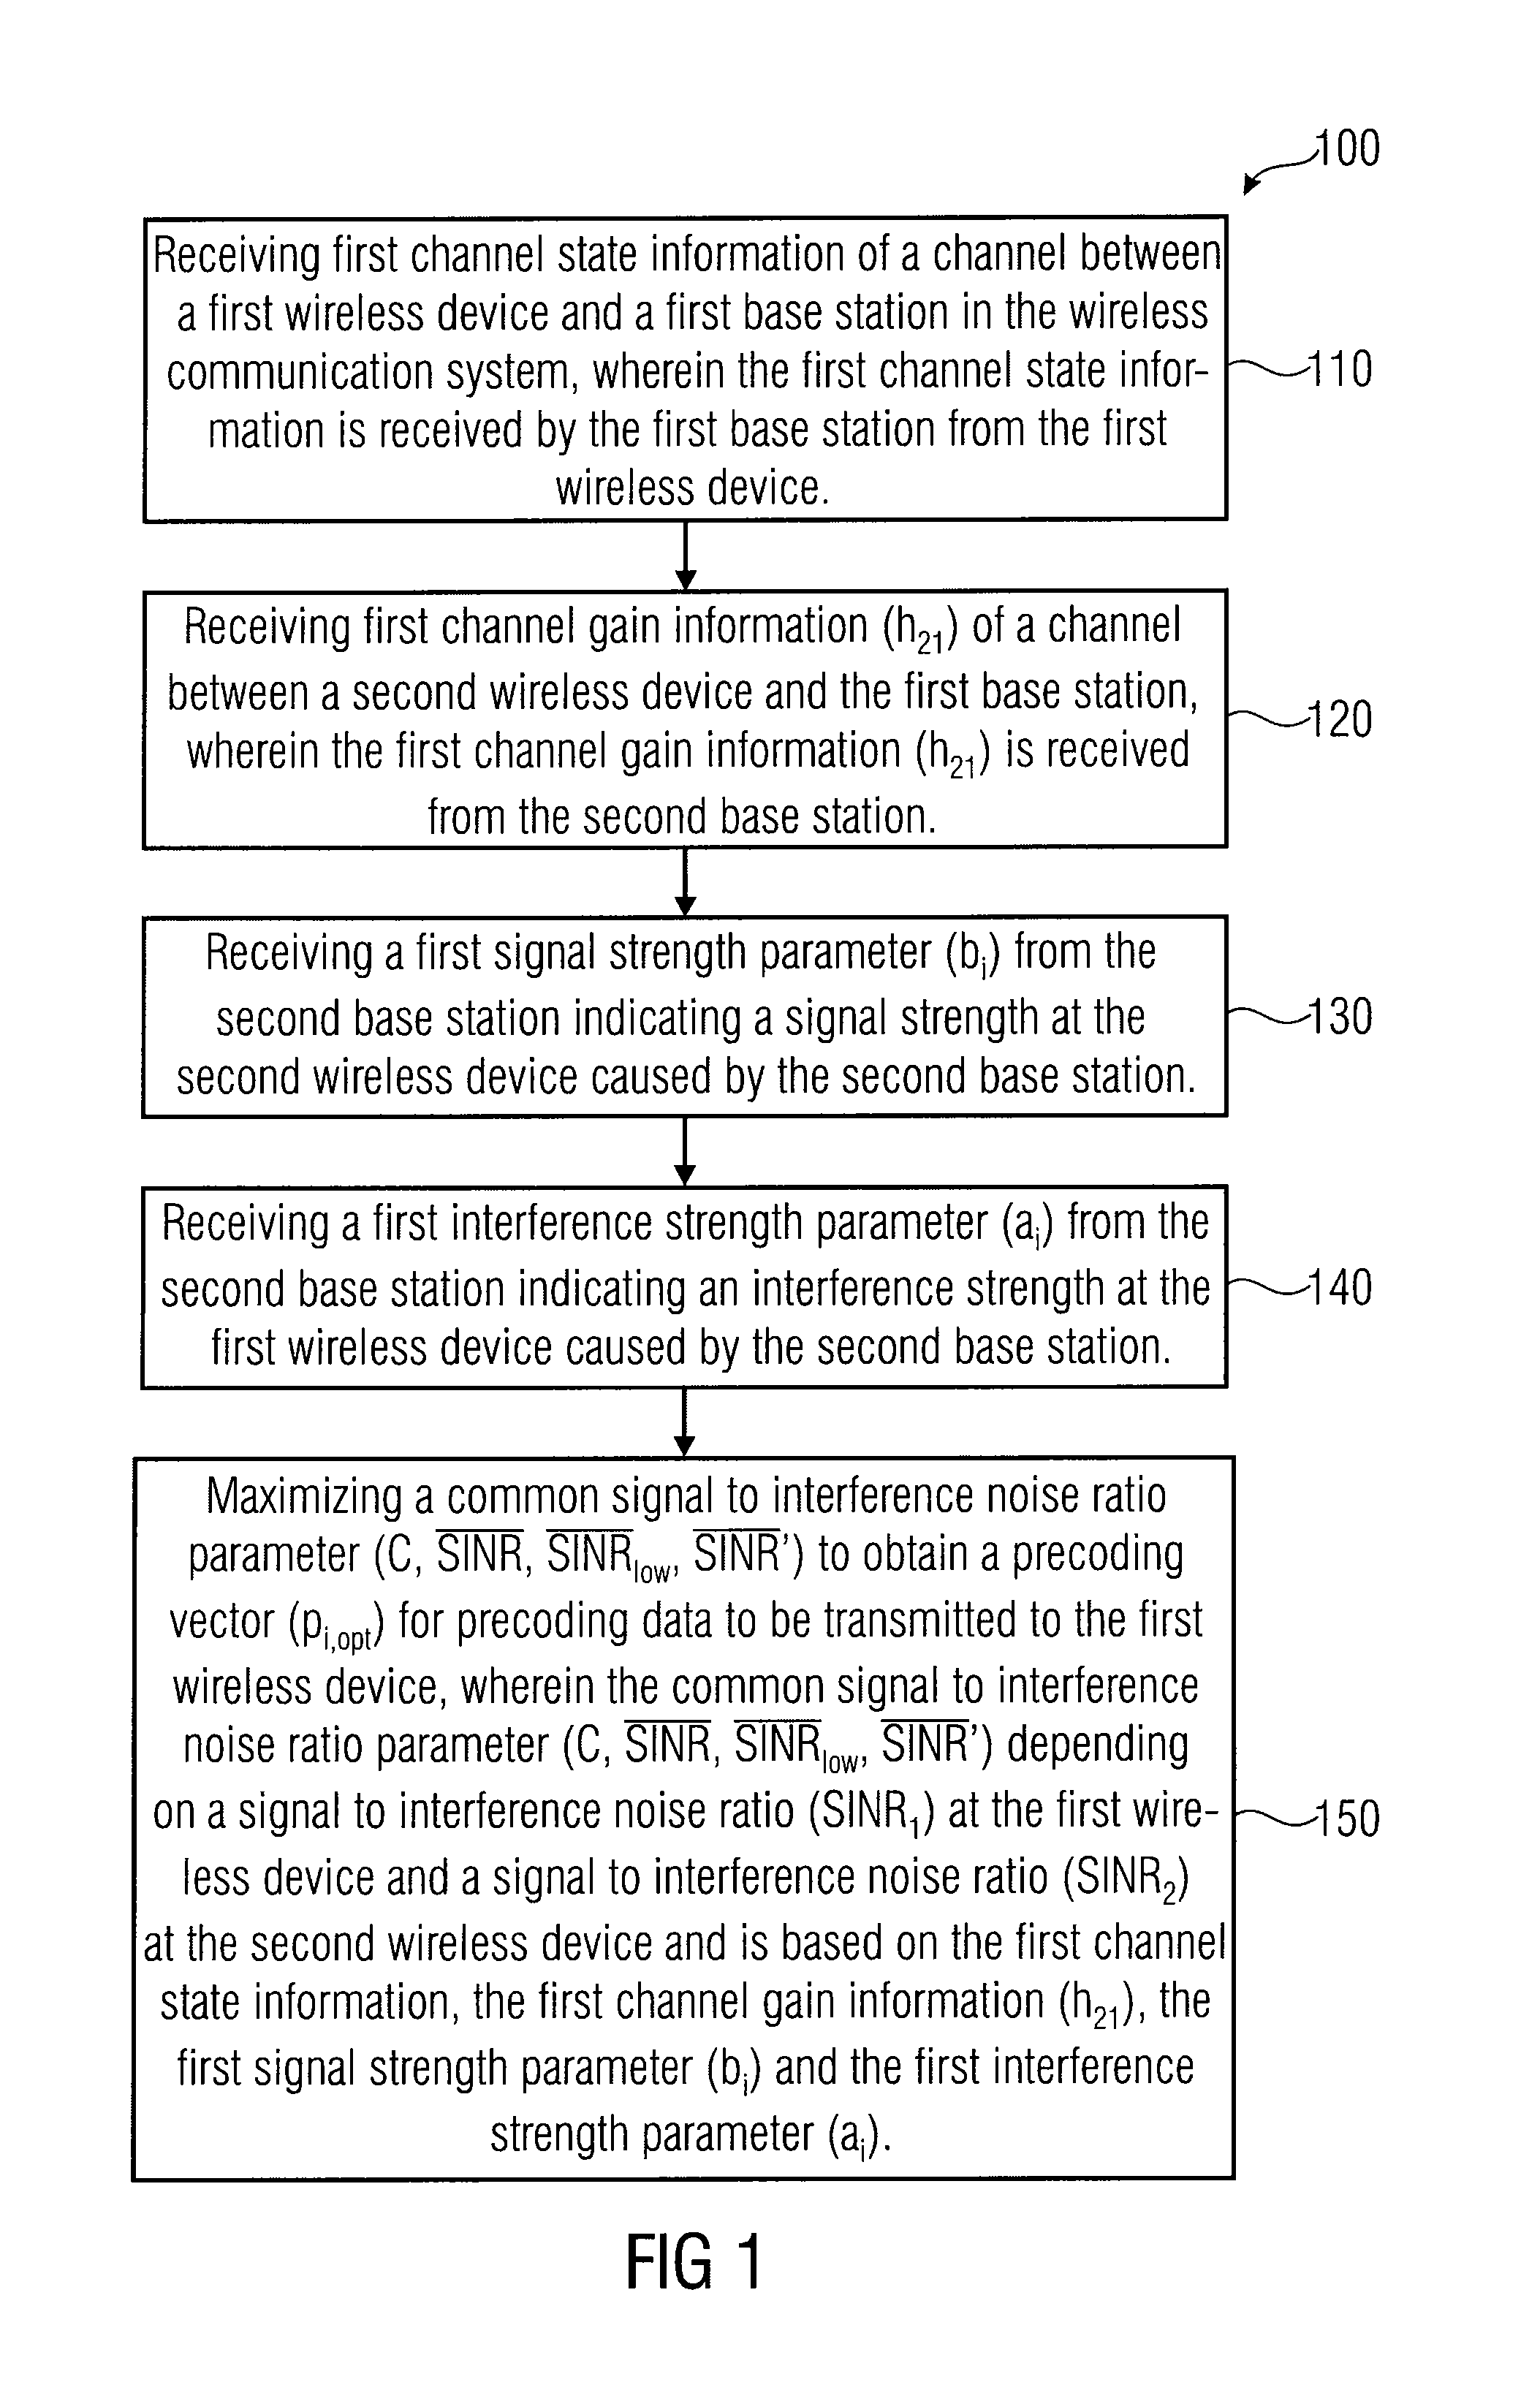 Method and apparatus for determining a precoding vector for precoding data to be transmitted to a wireless device in a wireless communication system